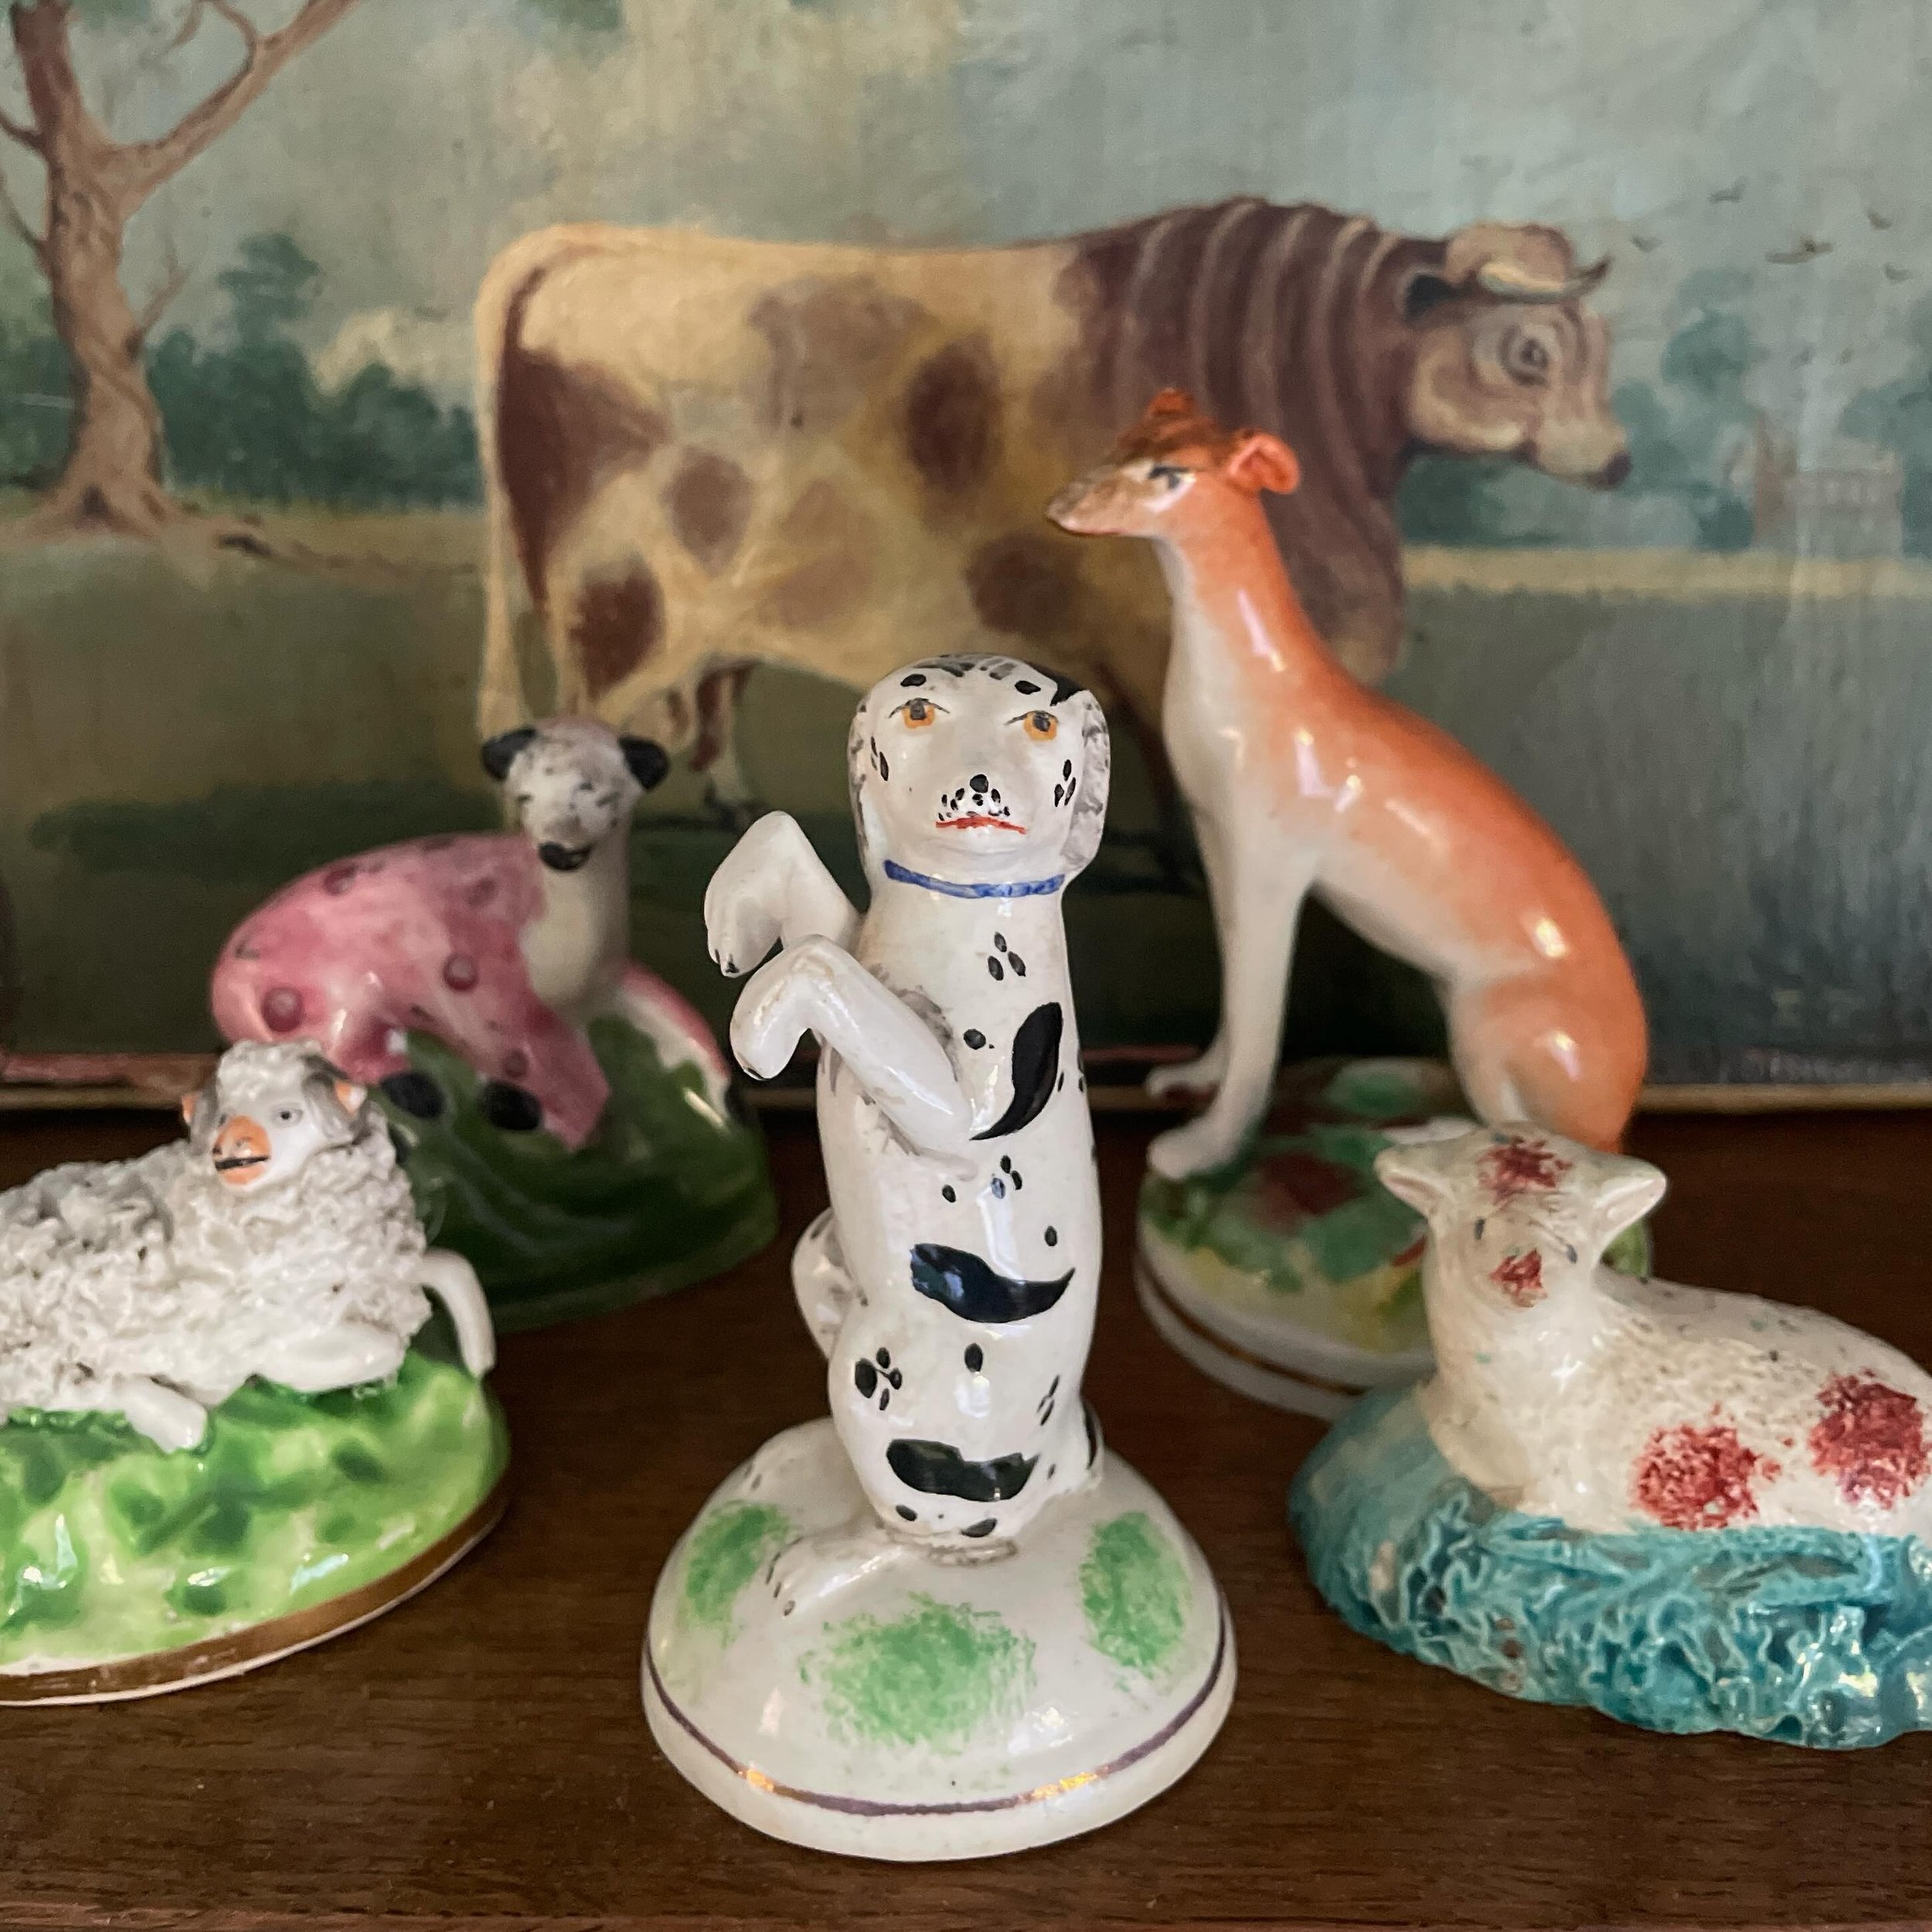 I love this very perky little antique Staffordshire dog. It&rsquo;s quite a rare find and resistance was futile. It&rsquo;s now sitting happily amongst the gang of antique Staffordshire misfits on my bedroom shelf and bringing me great joy! I have so